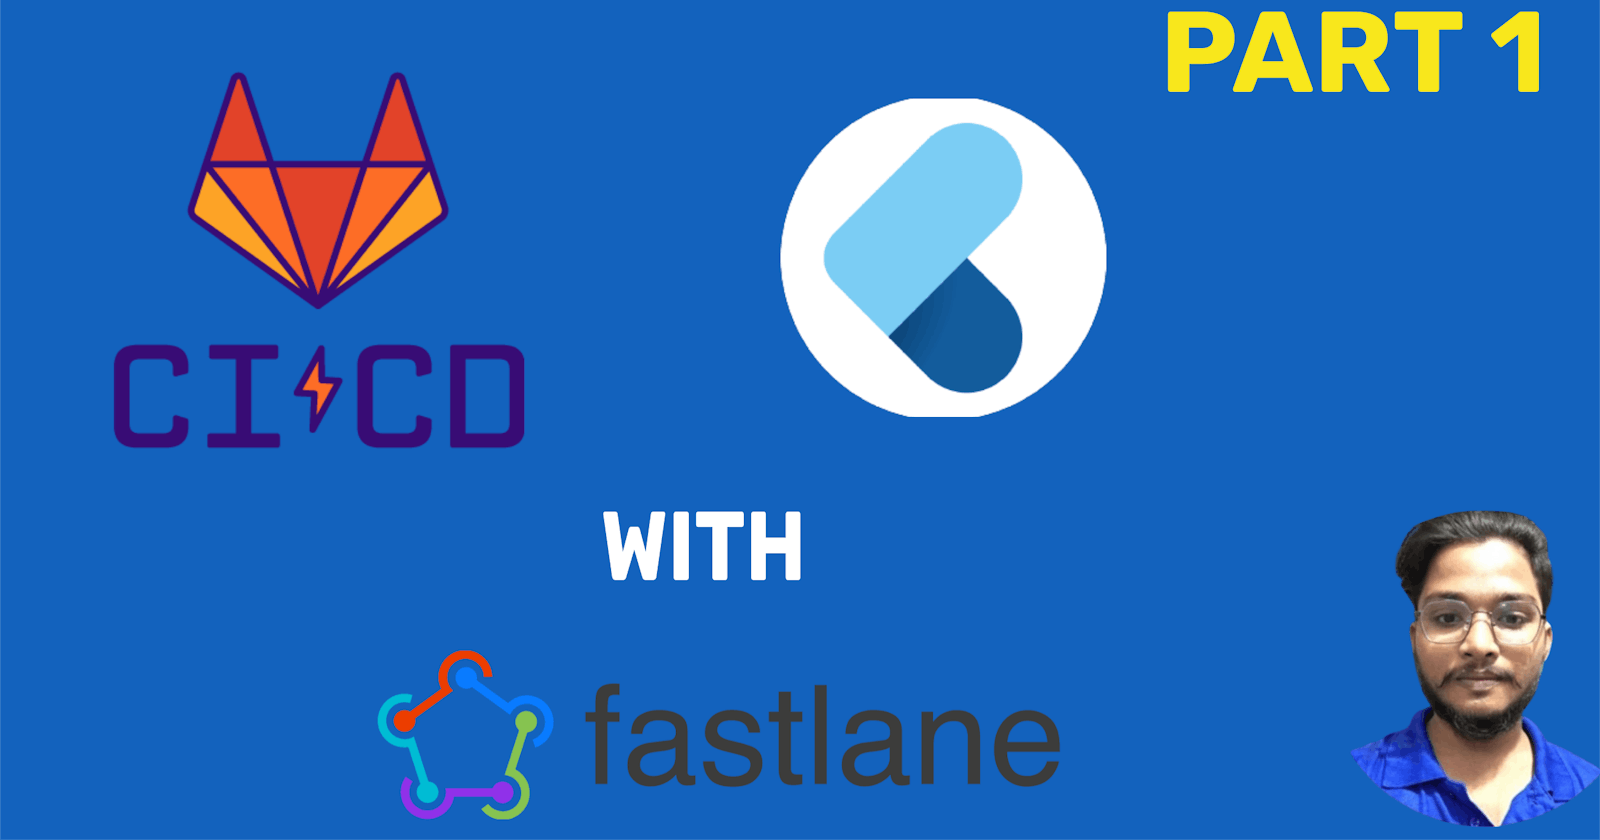 🚀 Added new YouTube series on "Flutter CI/CD with GitLab and Fastlane" !